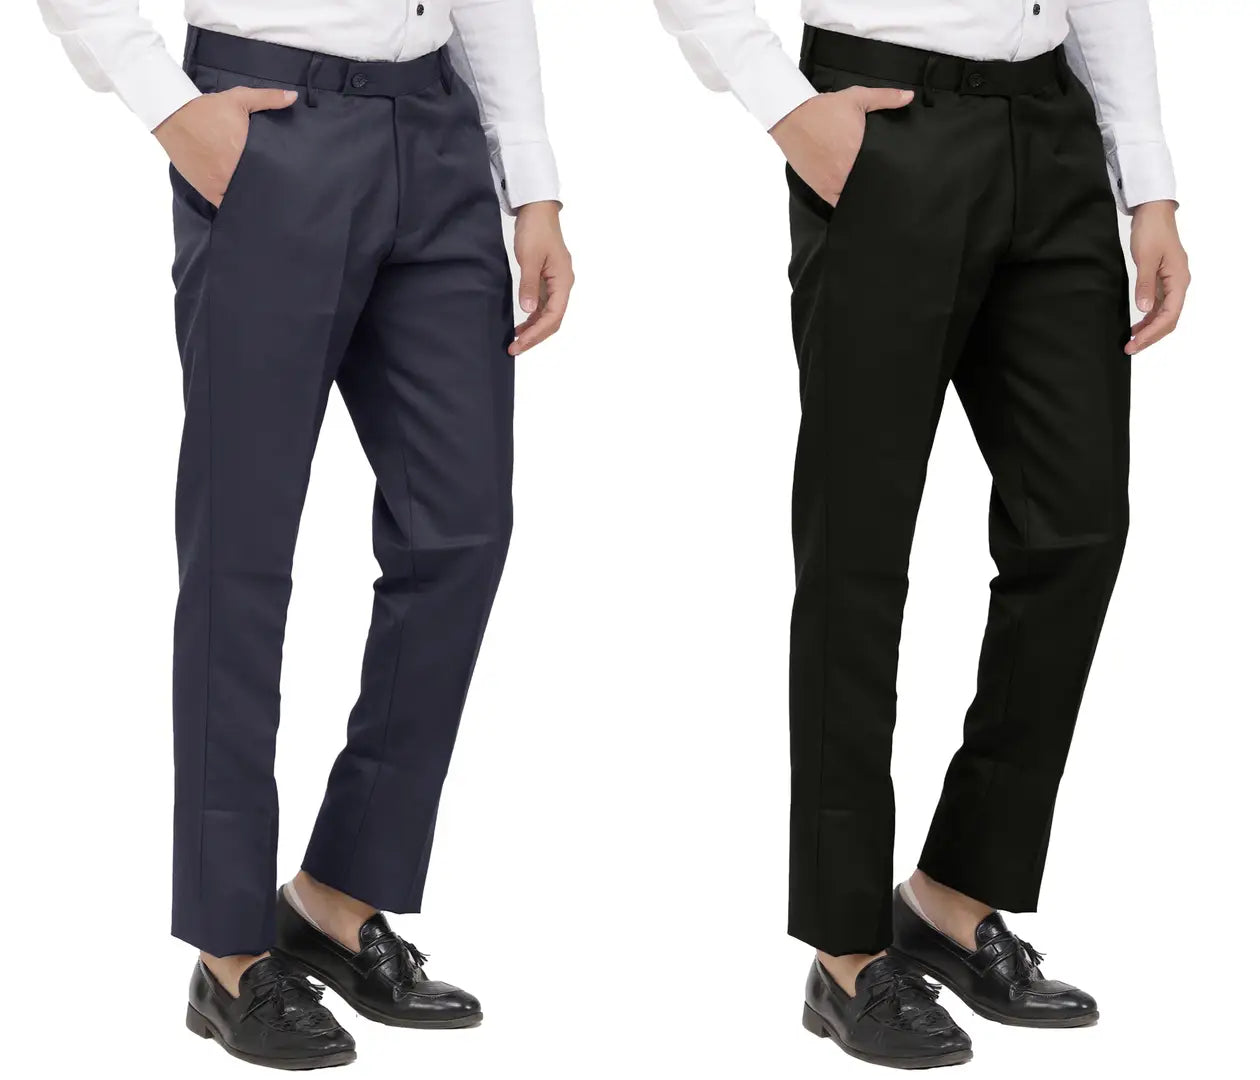 Kundan Men Poly-Viscose Blended Dark Grey and Black Formal Trousers ( Pack of 2 Trousers )